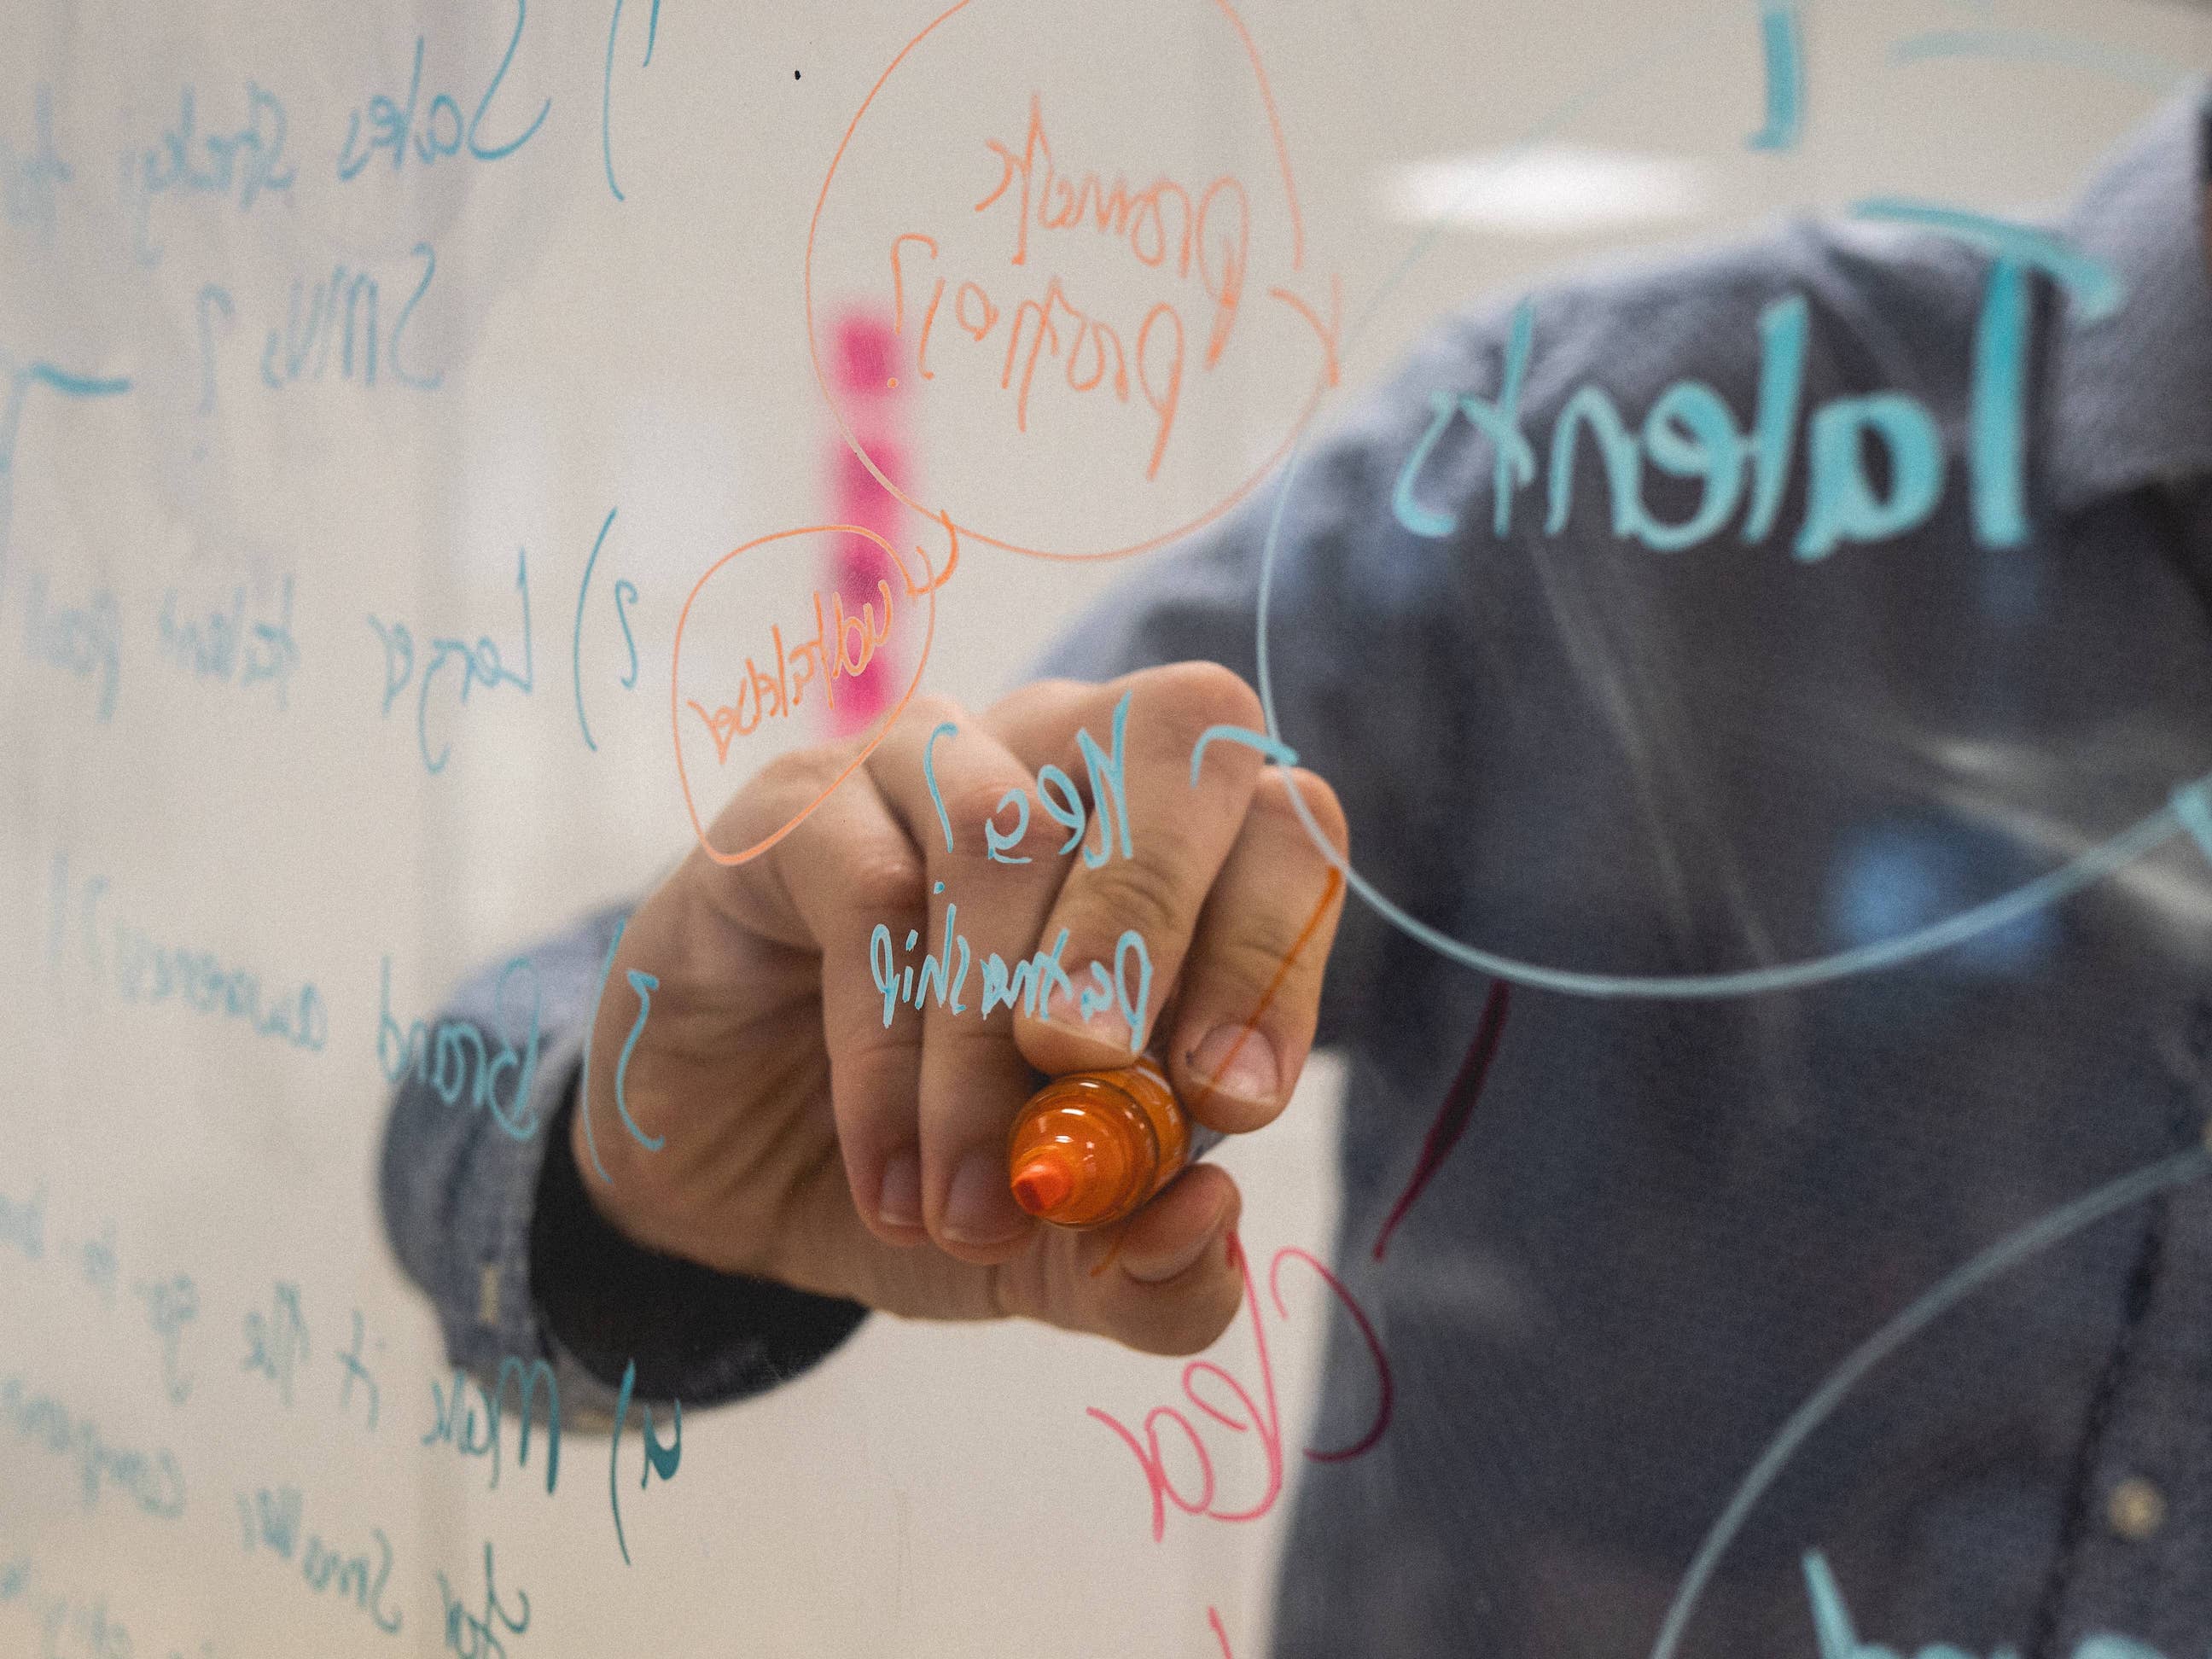 A hand holding an orange marker writes on a clear surface during a workshop.